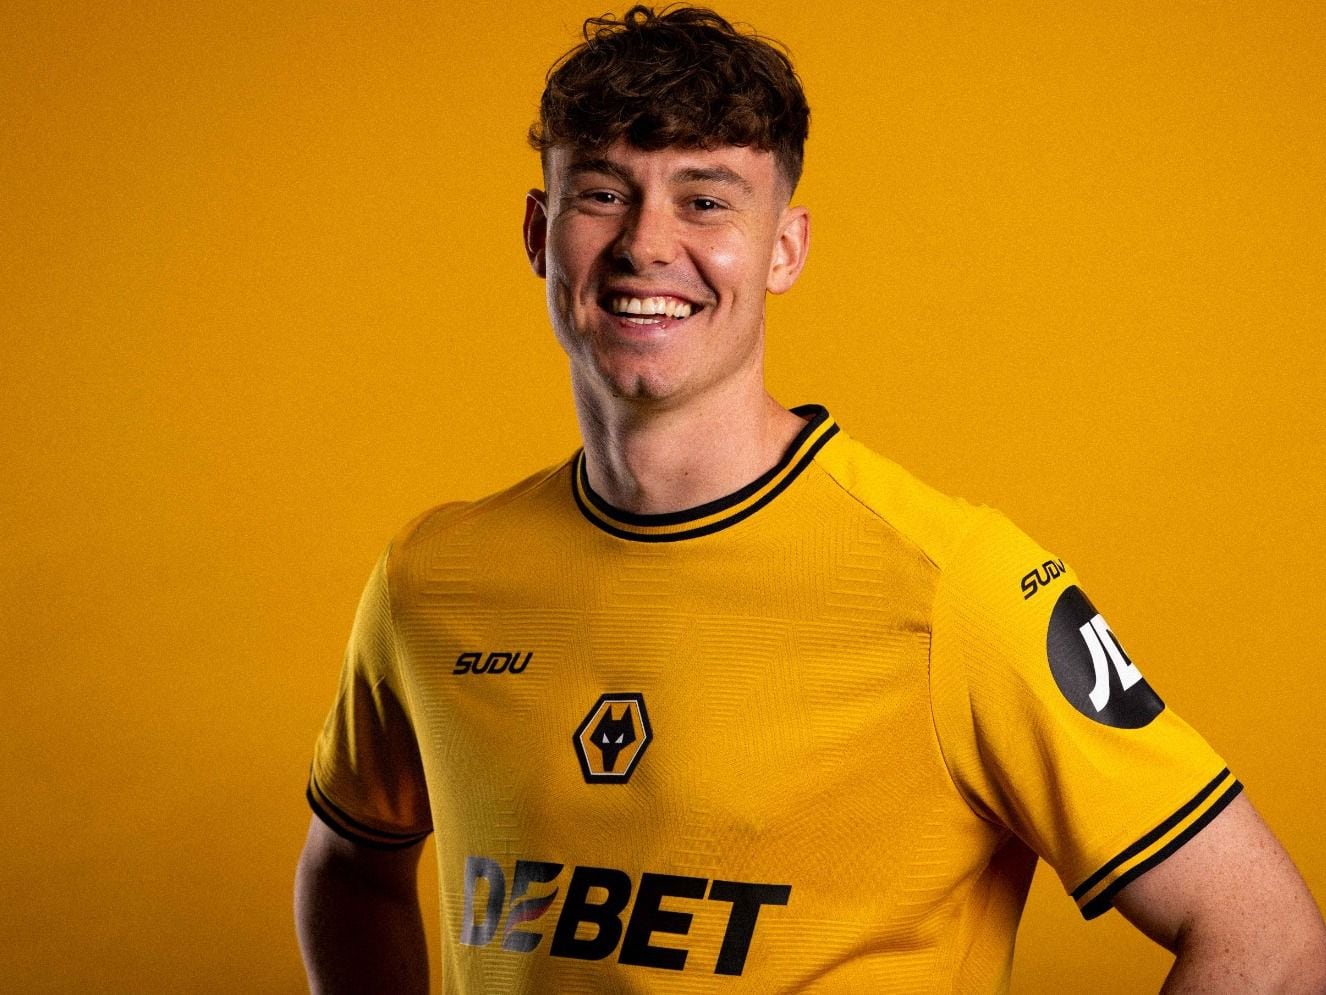 New shirt has goes down well with Wolves faithful